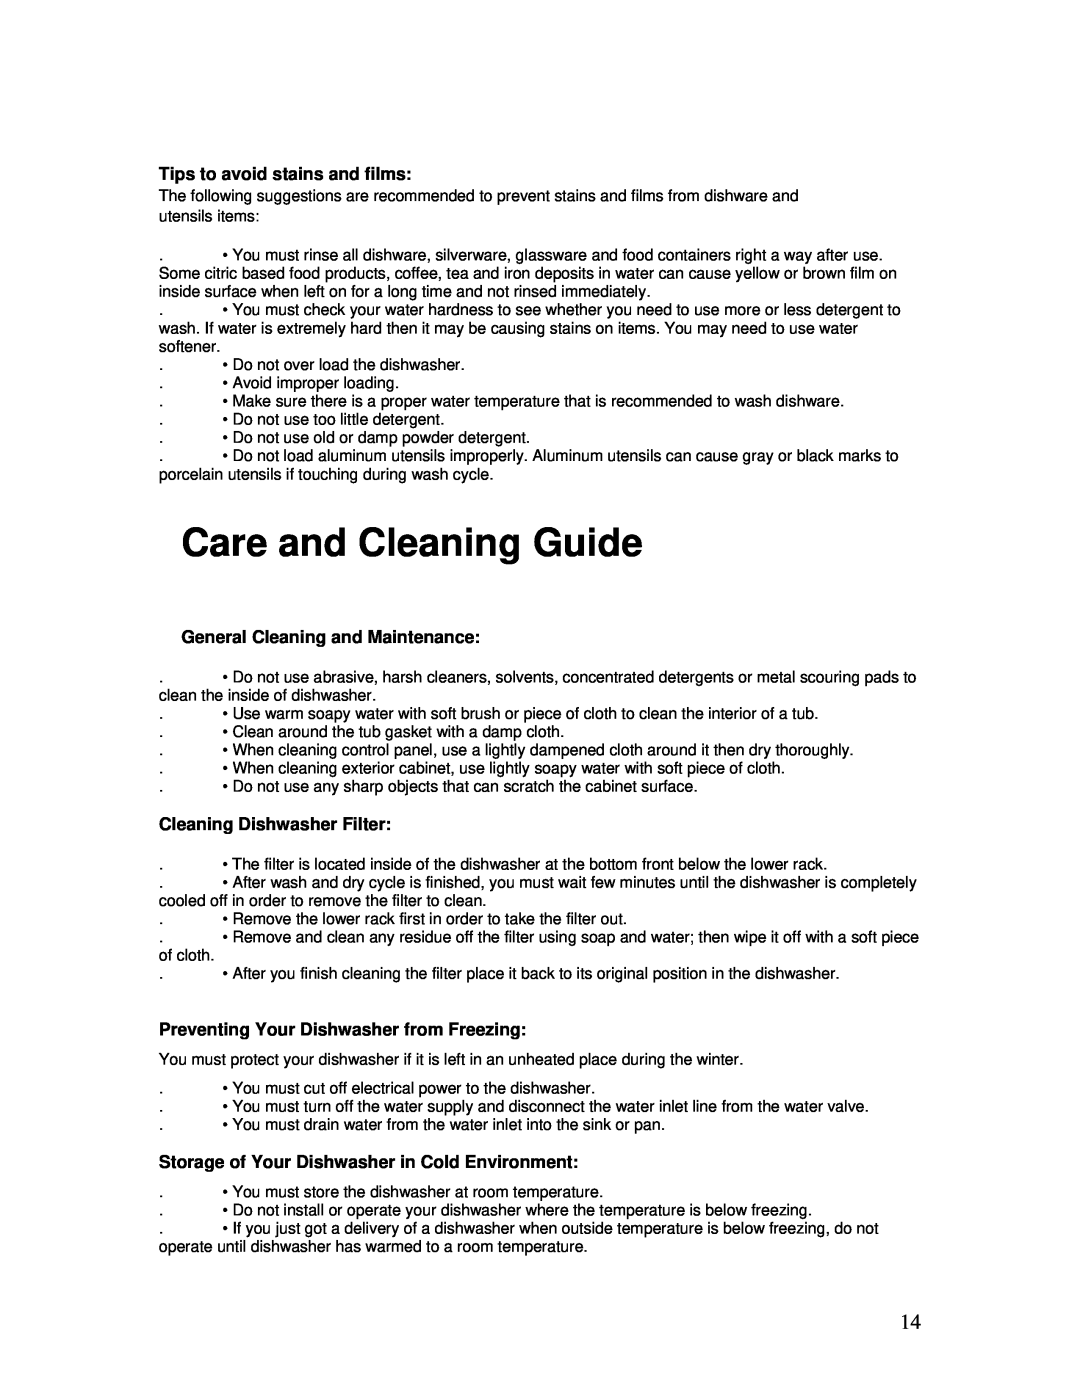 Tappan TDT4030B, TDT4030W Care and Cleaning Guide, Tips to avoid stains and films, General Cleaning and Maintenance 